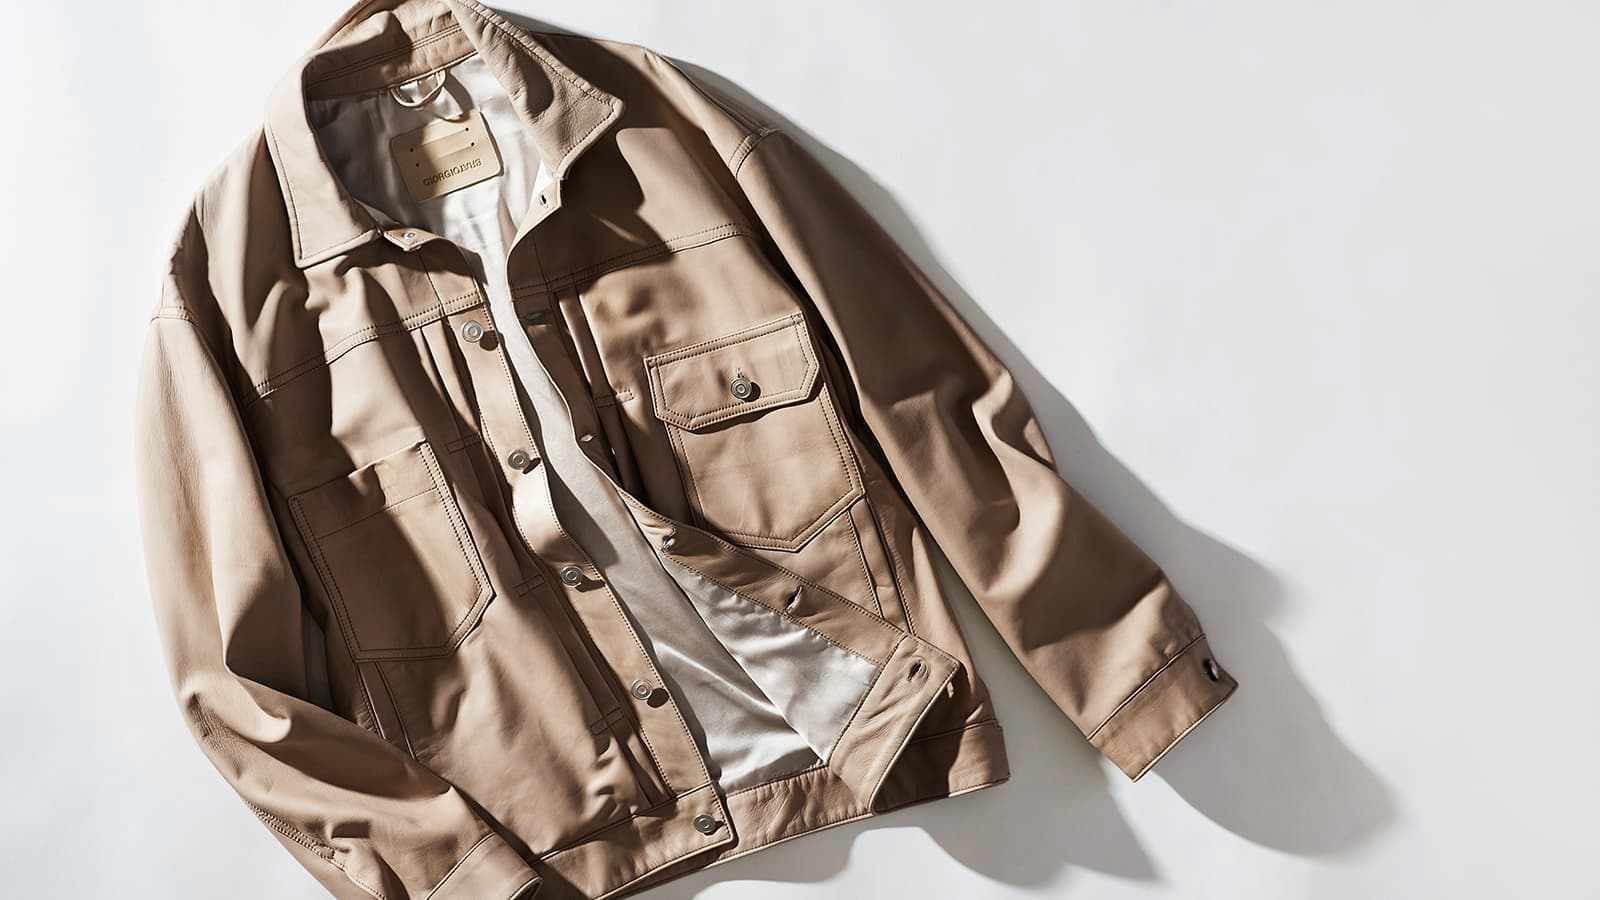 Giorgio Bratto's leather blouson is a rich sublimation of the classic.